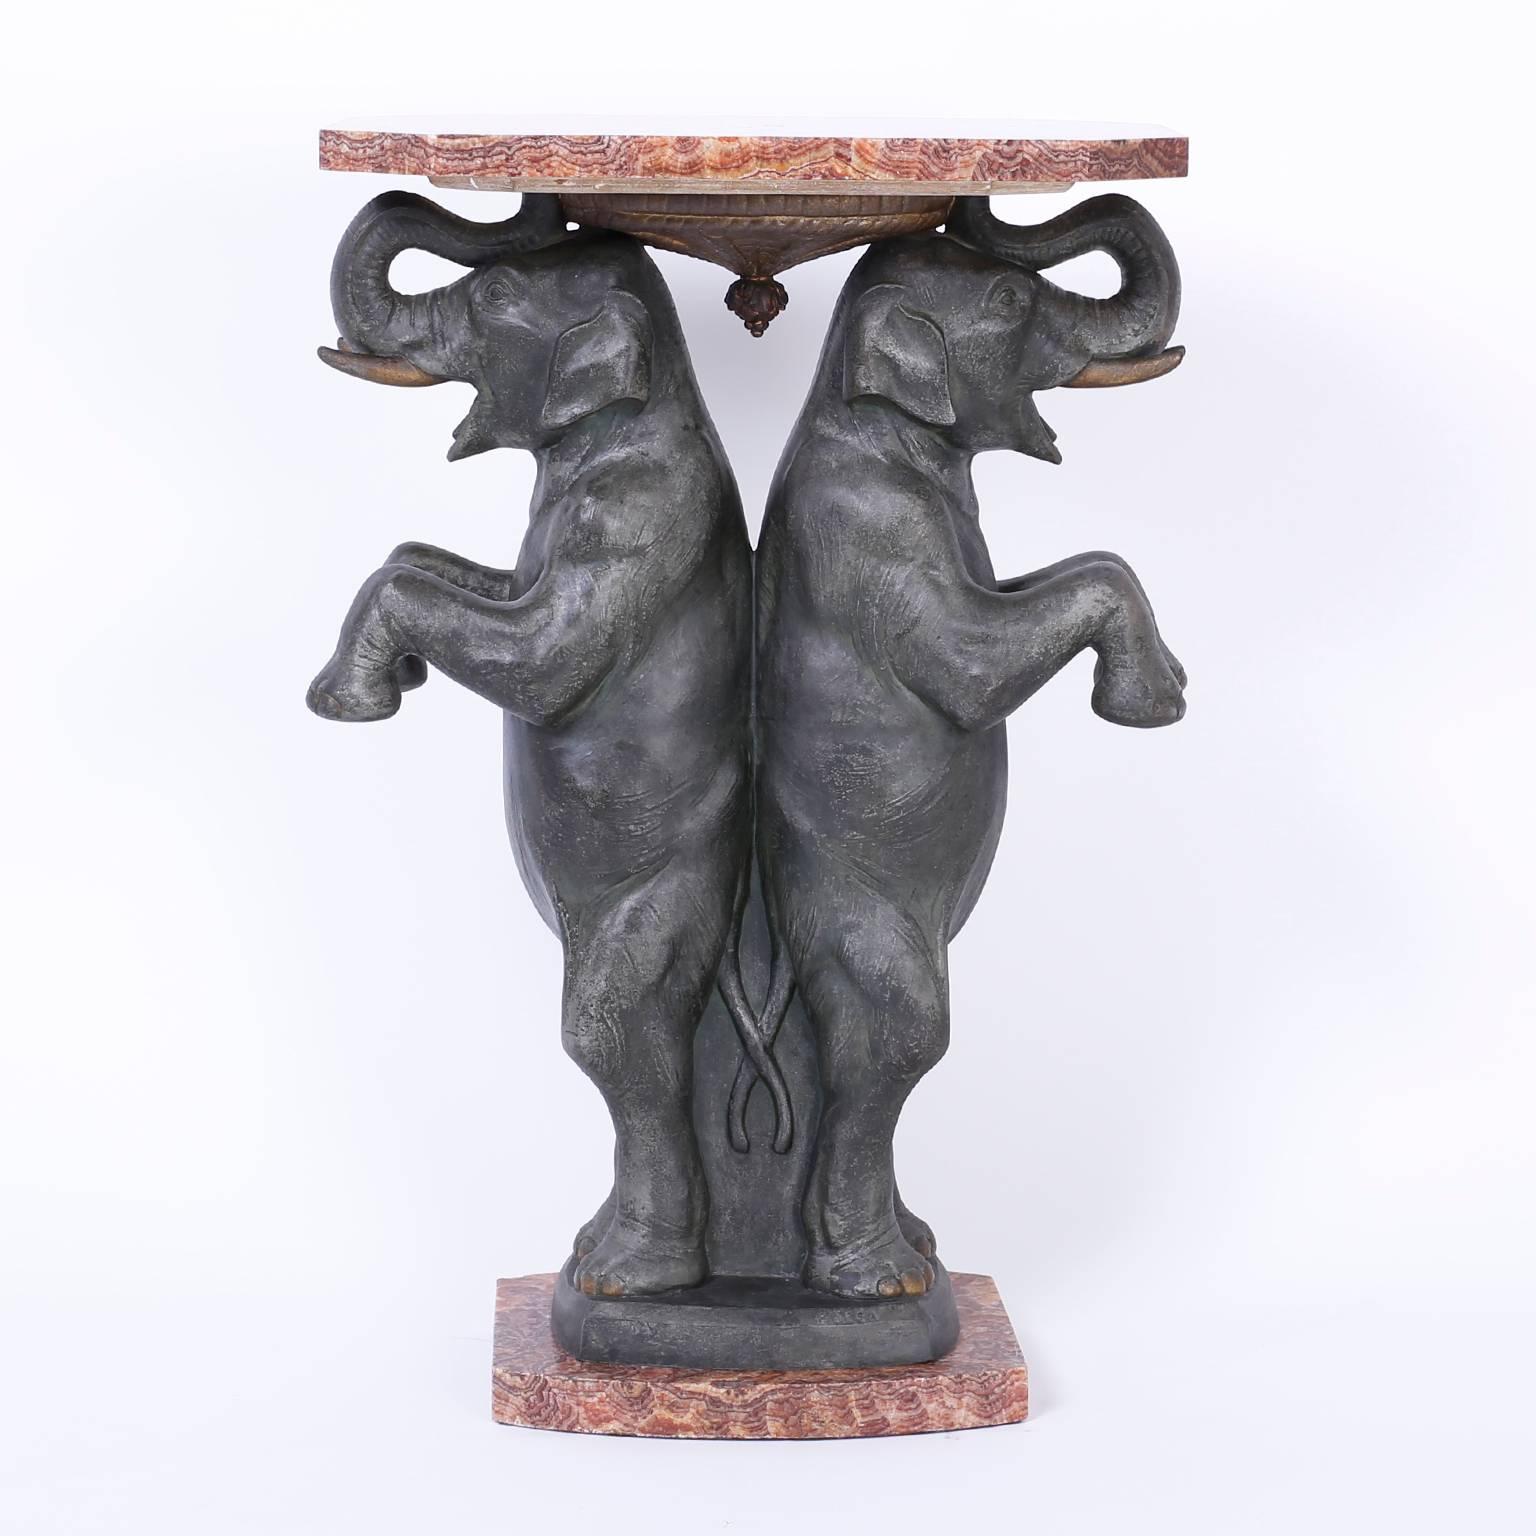 Art Deco pedestal, table or stand cast in a durable metal depicting two back to back elephants. The top and base are a rare red quartz named Rhodochrosite. This piece is signed by the noted French sculpture Pierre Sega.